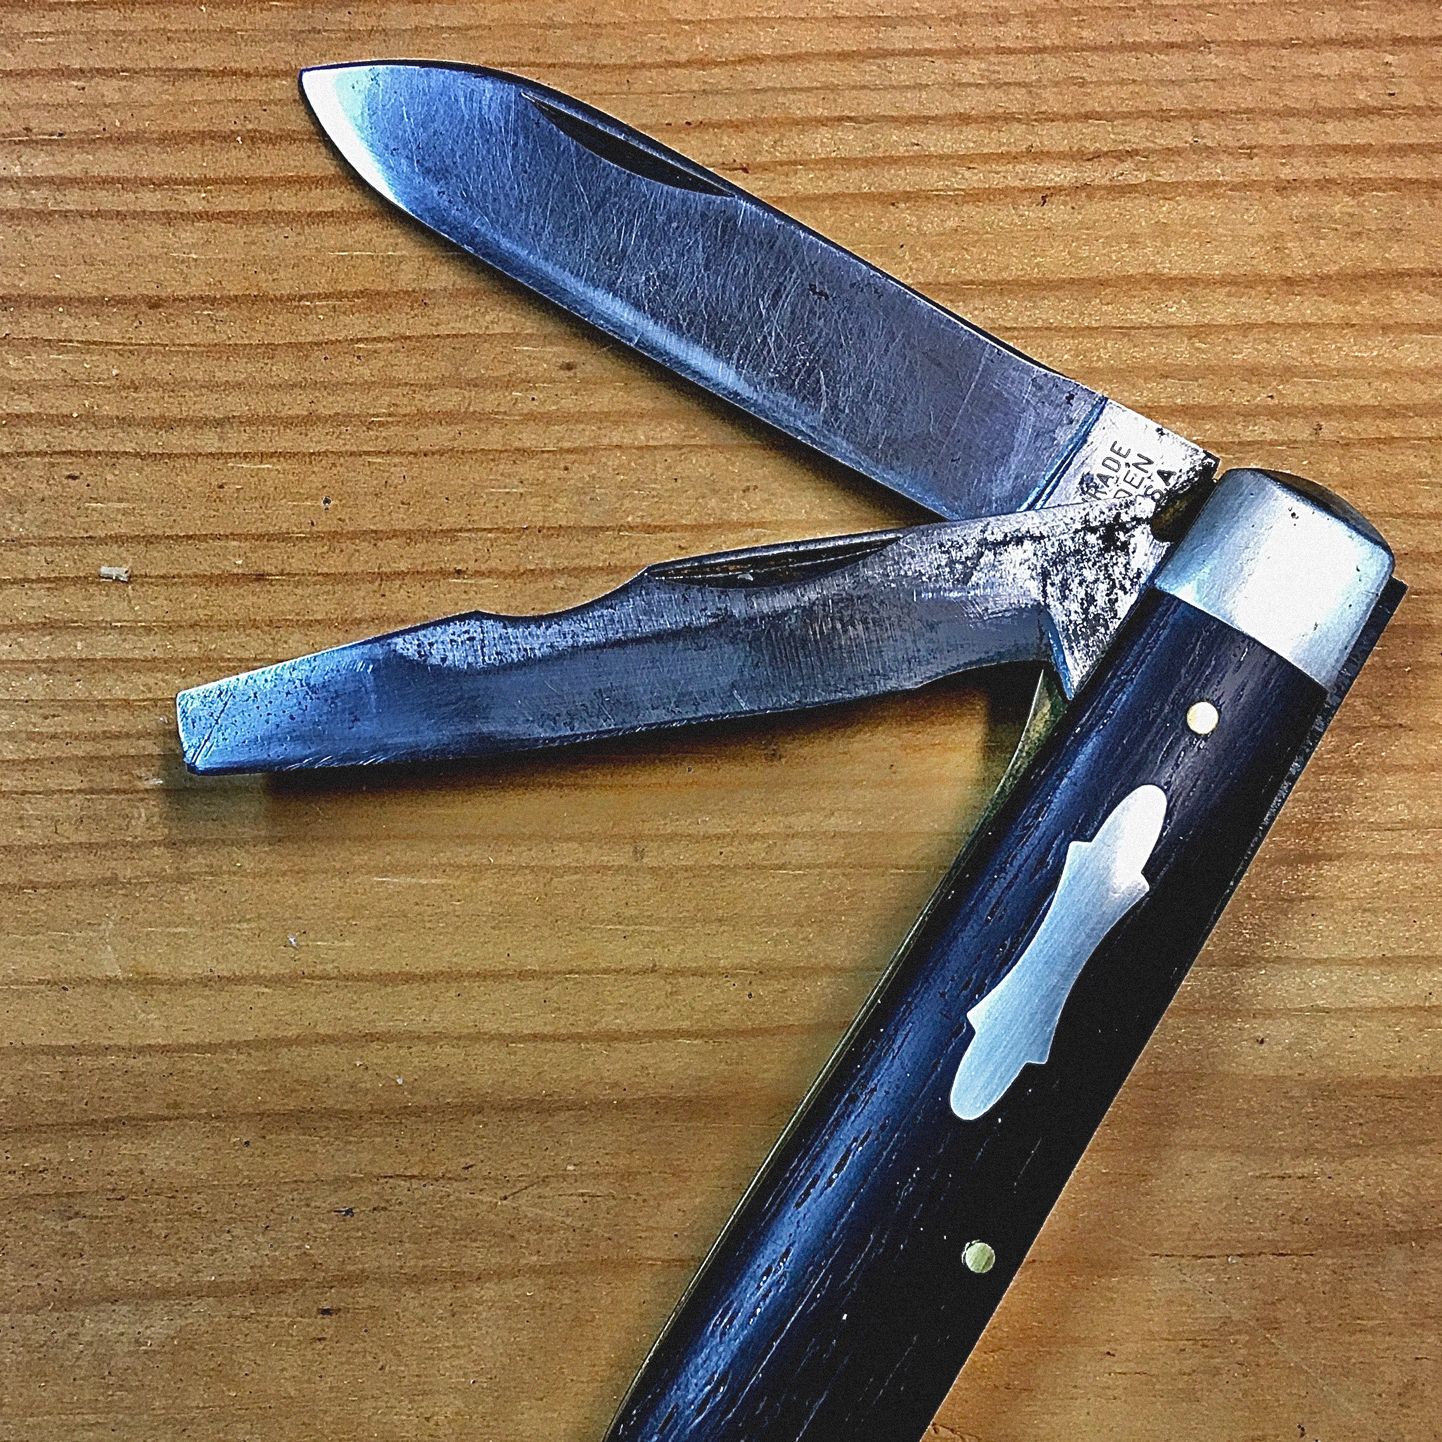 My TL-29 Pocket Knife Has Held Up for Decades—And Will for Many More